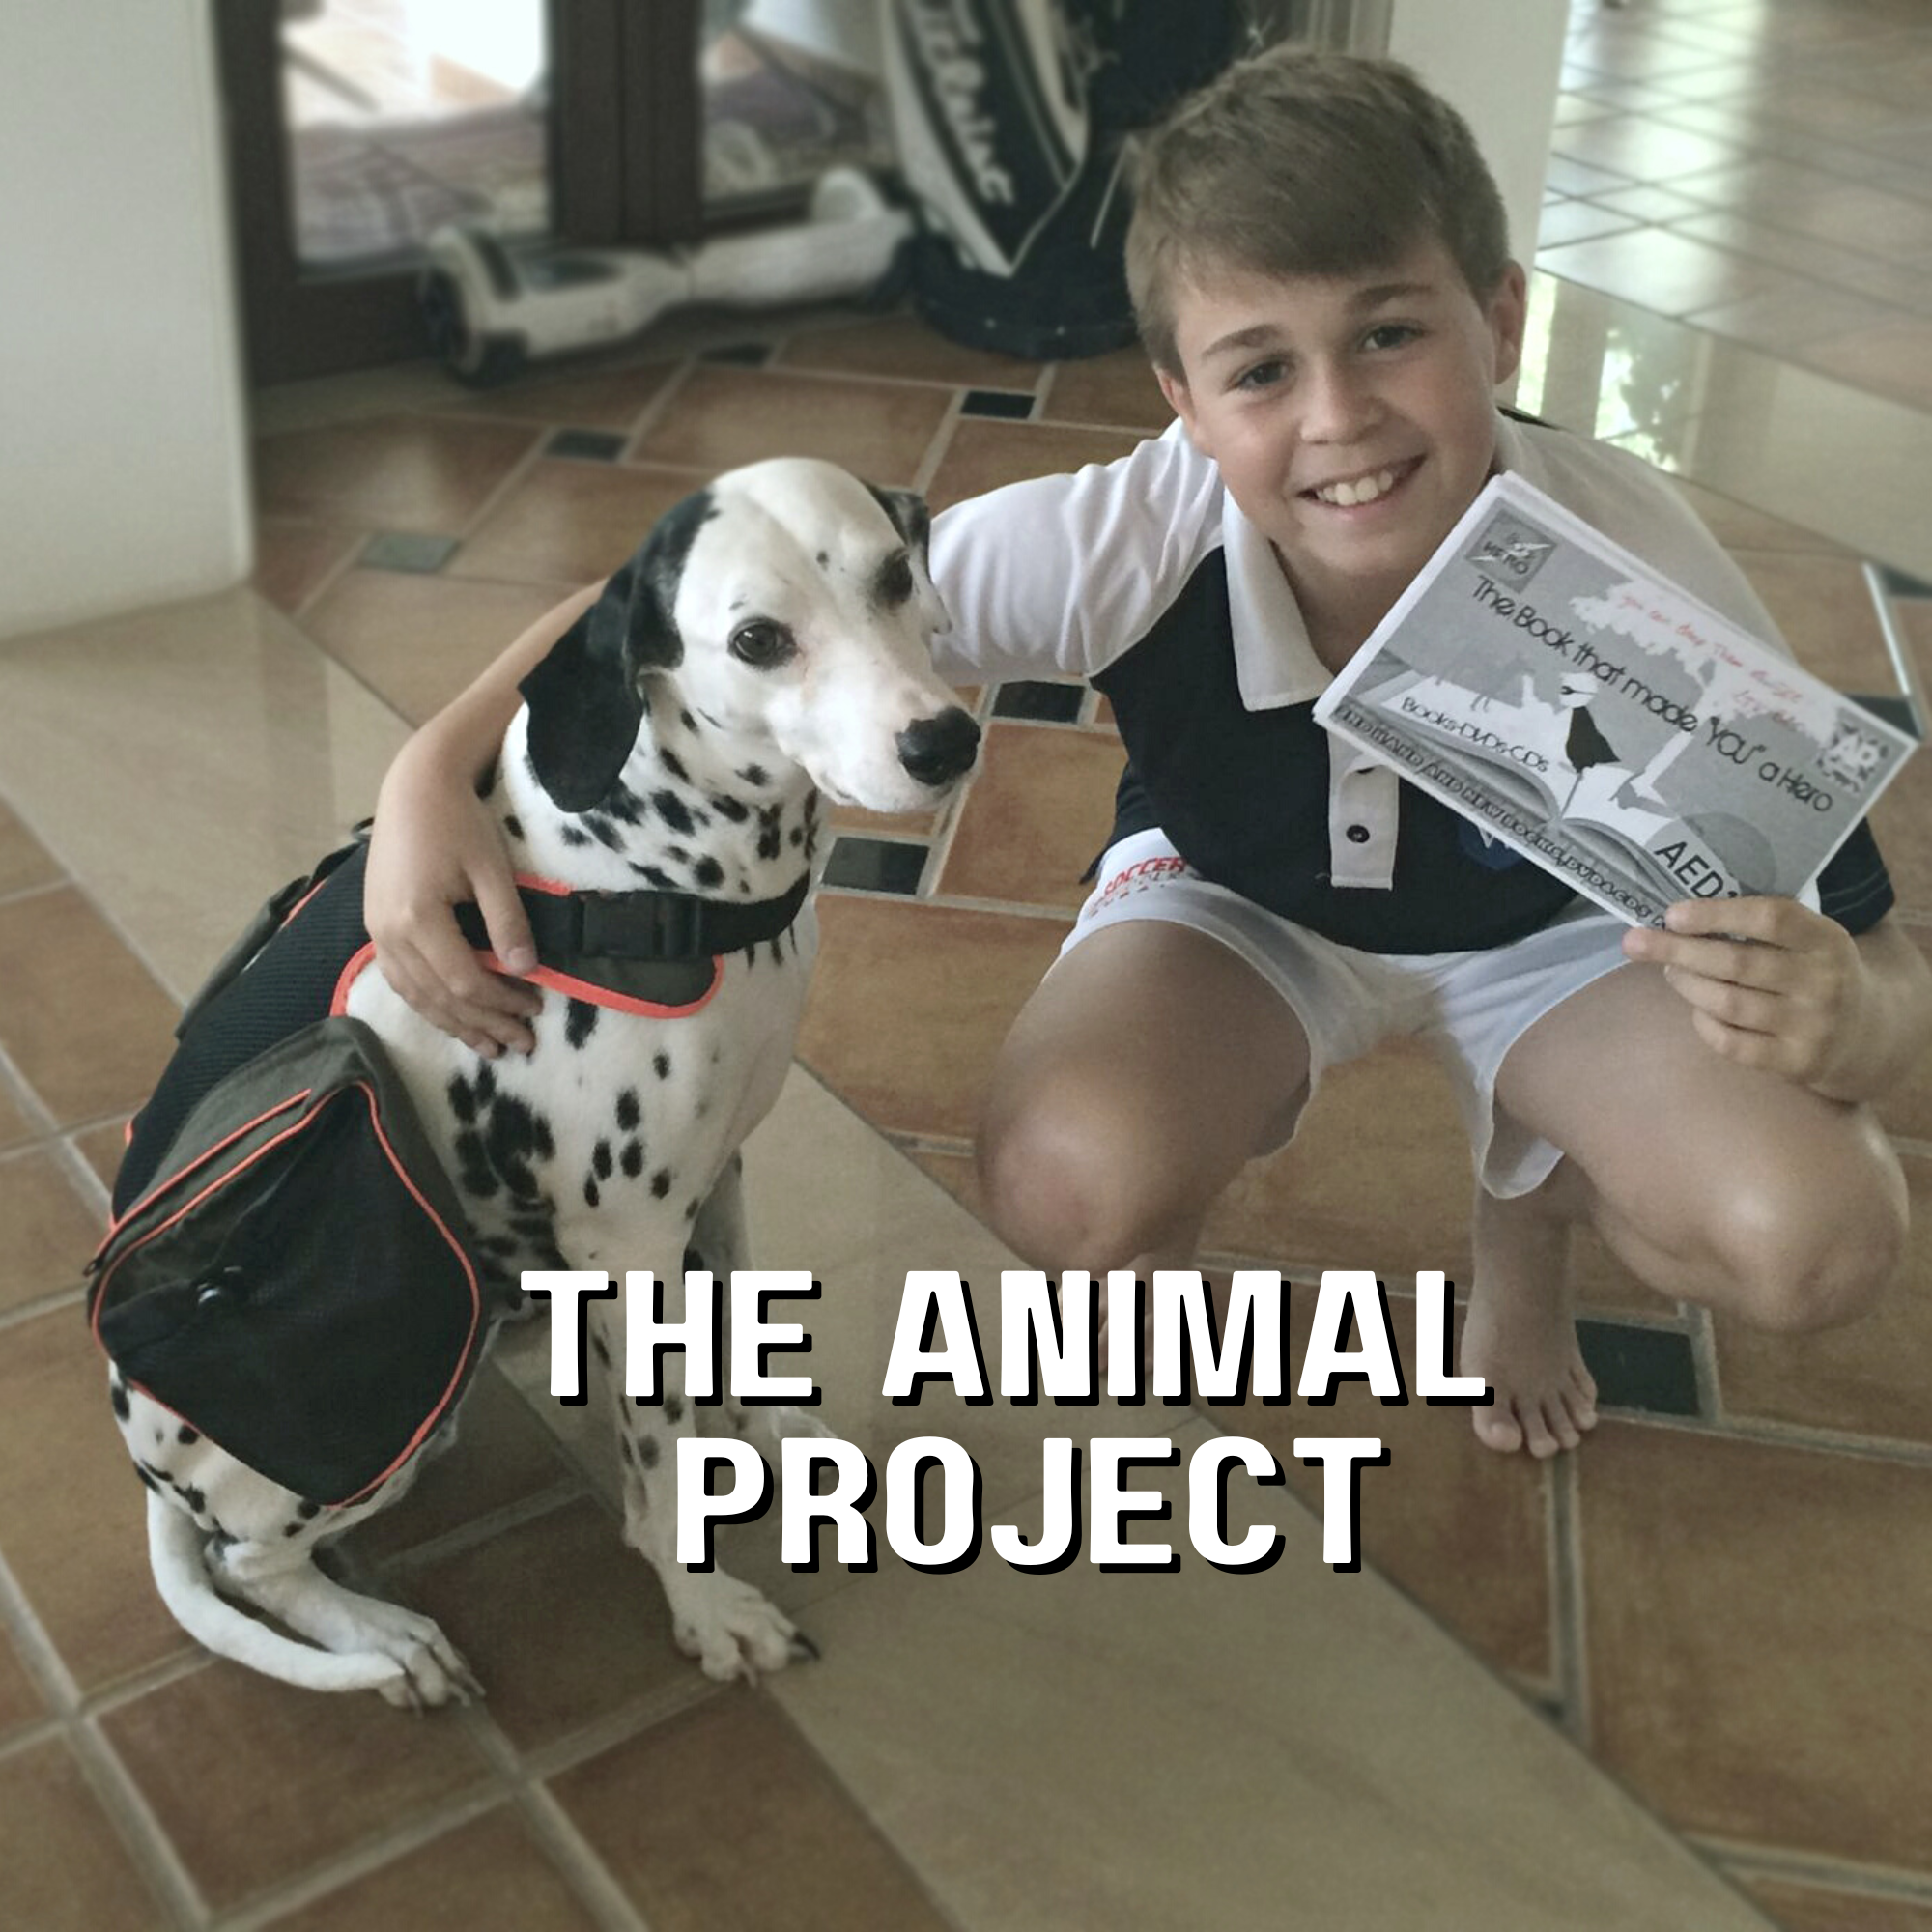 THE ANIMAL PROJECT